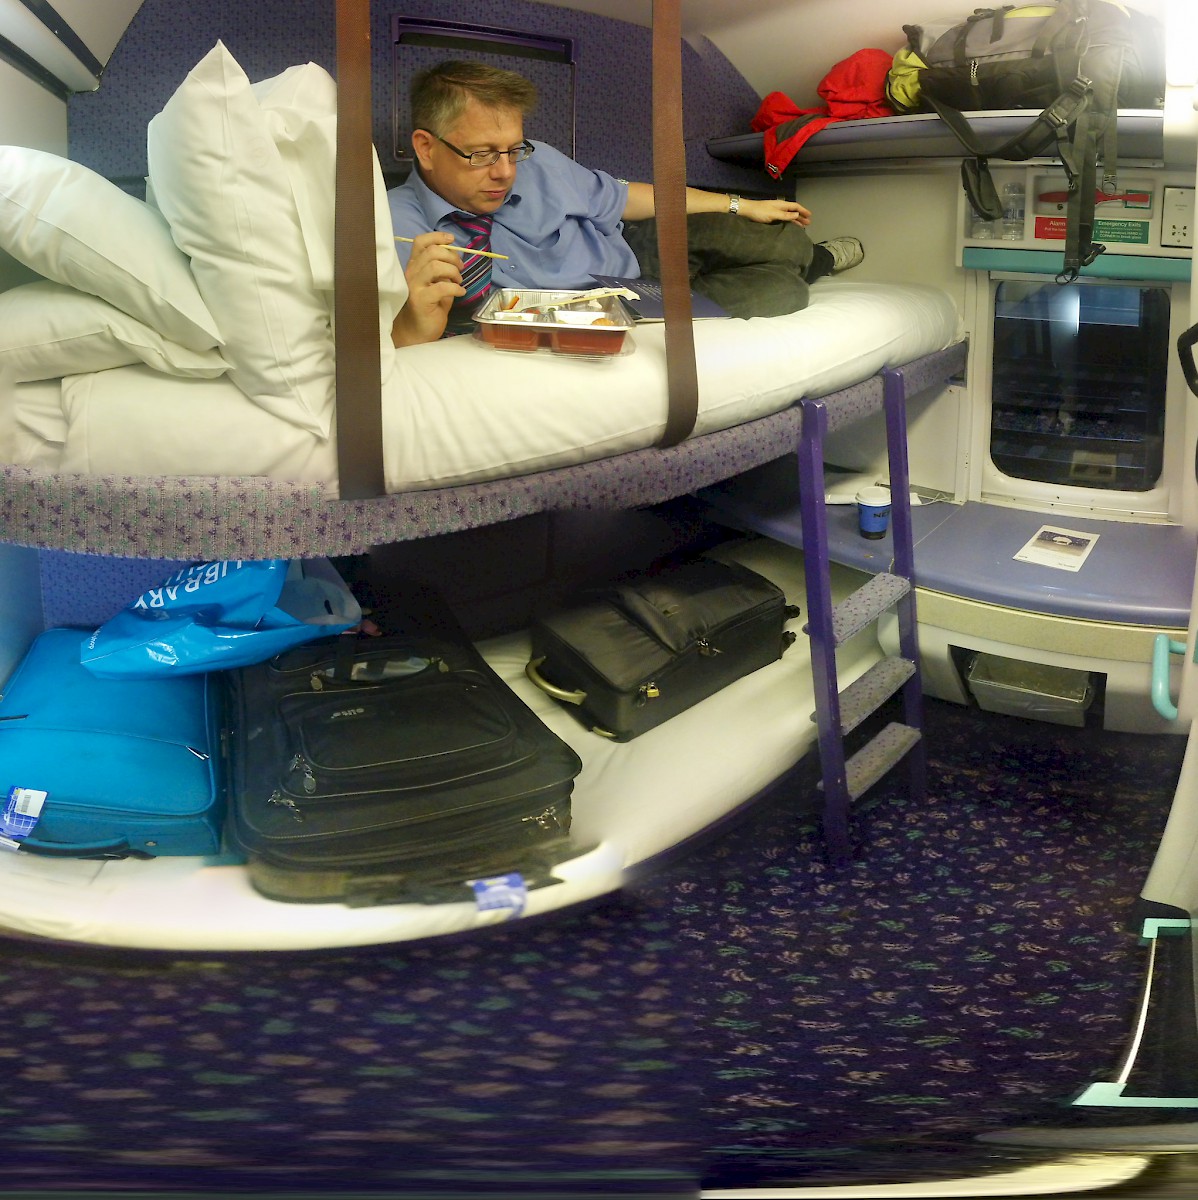 On The Rails: The UK's Best Sleeper Trains